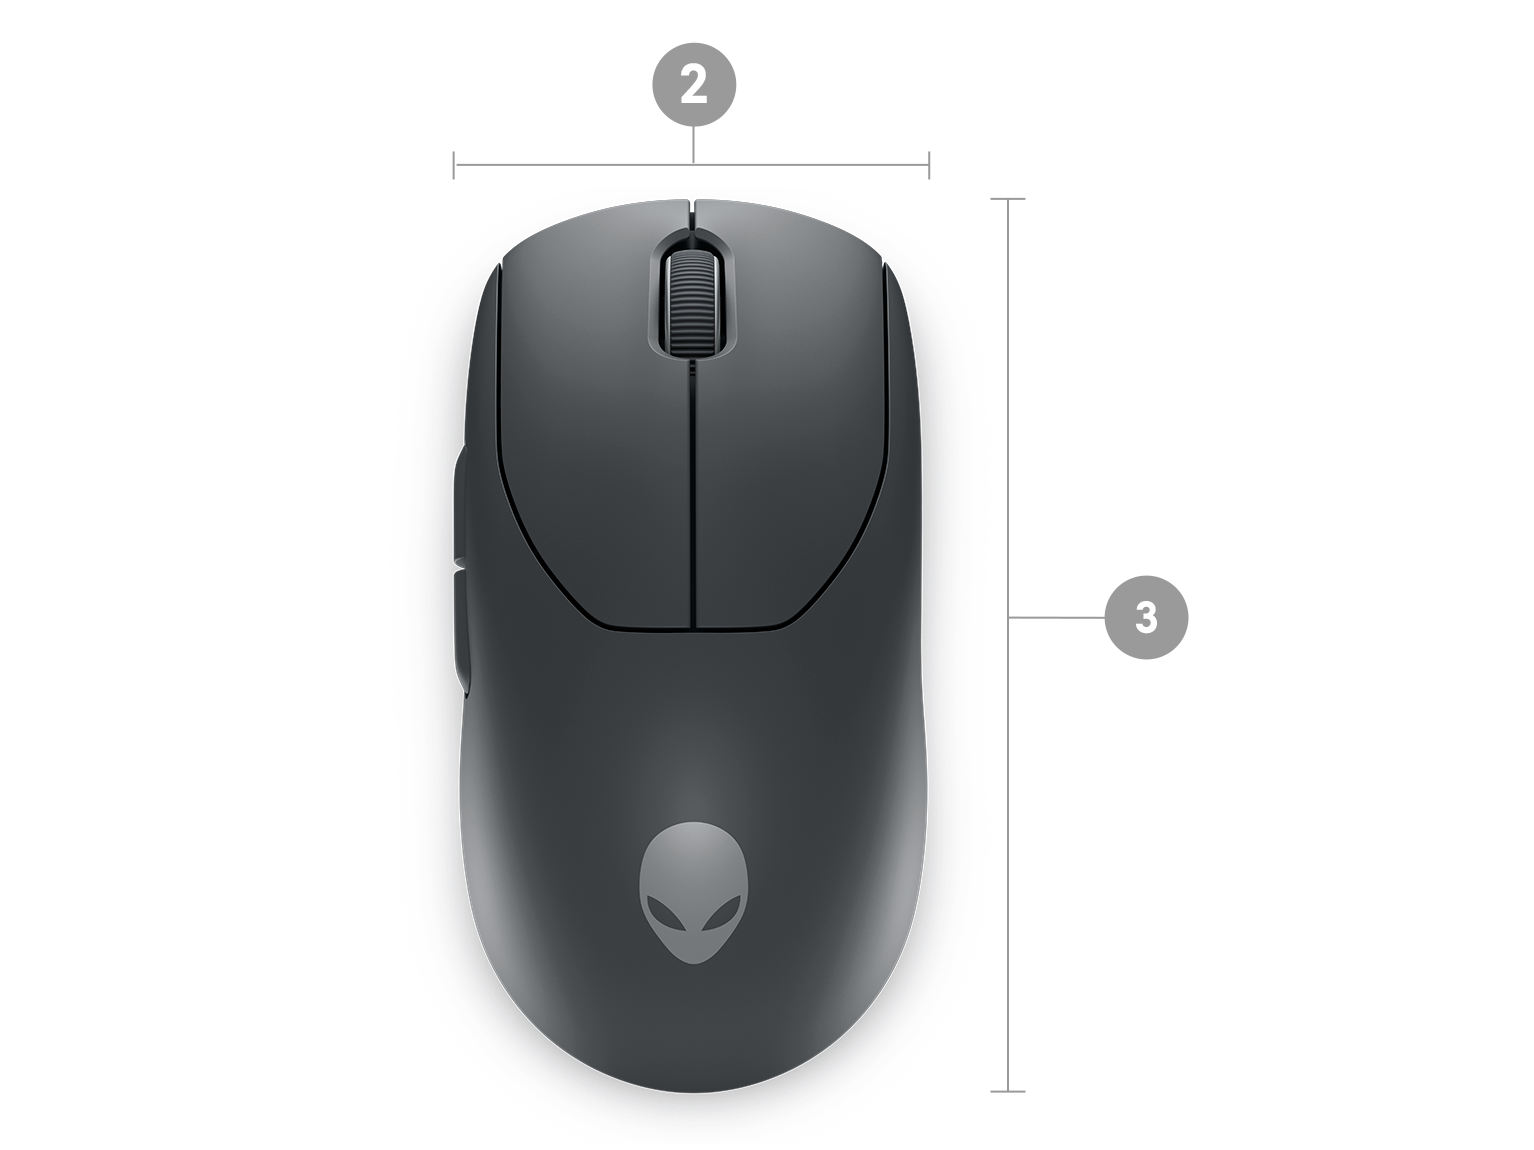 Dell Alienware Pro Wireless Gaming Mouse with numbers from 1 to 3 showing the product dimensions and weight.